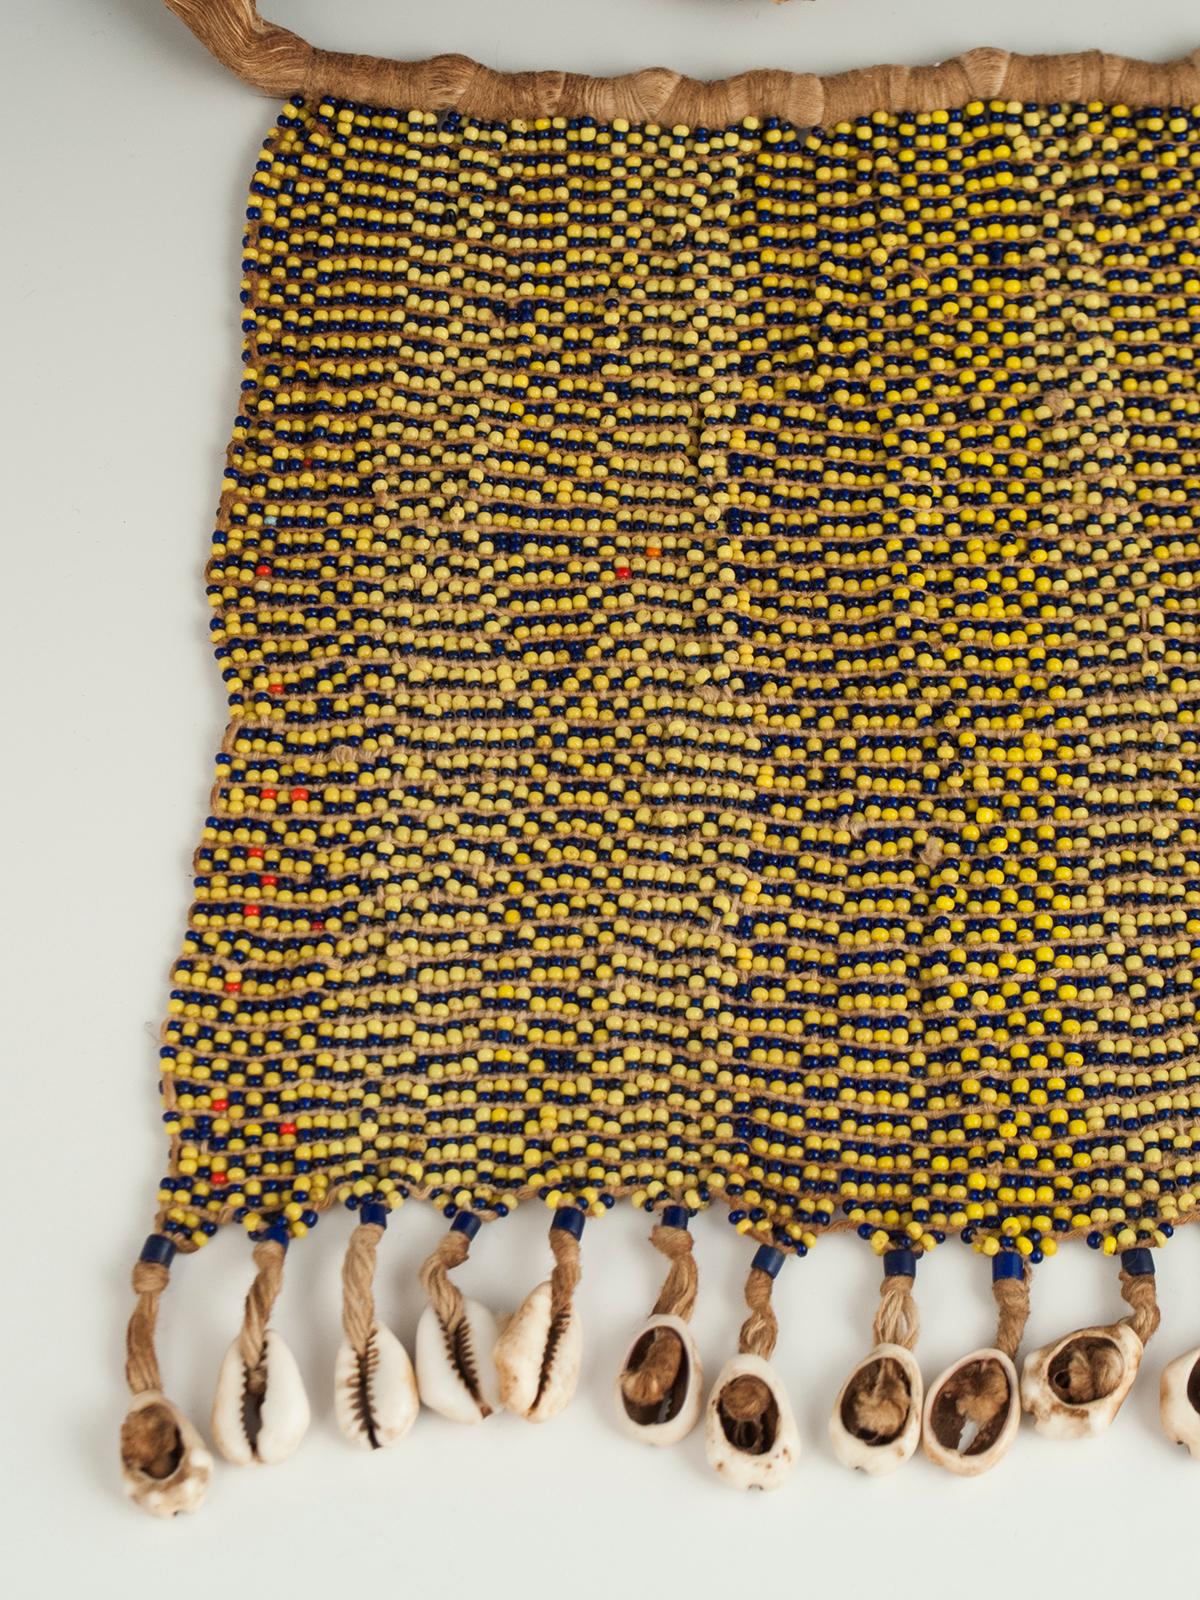 Mid-20th century tribal beaded cache-sexe modesty apron (pikuran), Bana Guili people, Mandara Mountains, Cameroon

An unusual cache-sexe made of blue and yellow beads so scattered that they appear pea green from a distance. These colorful